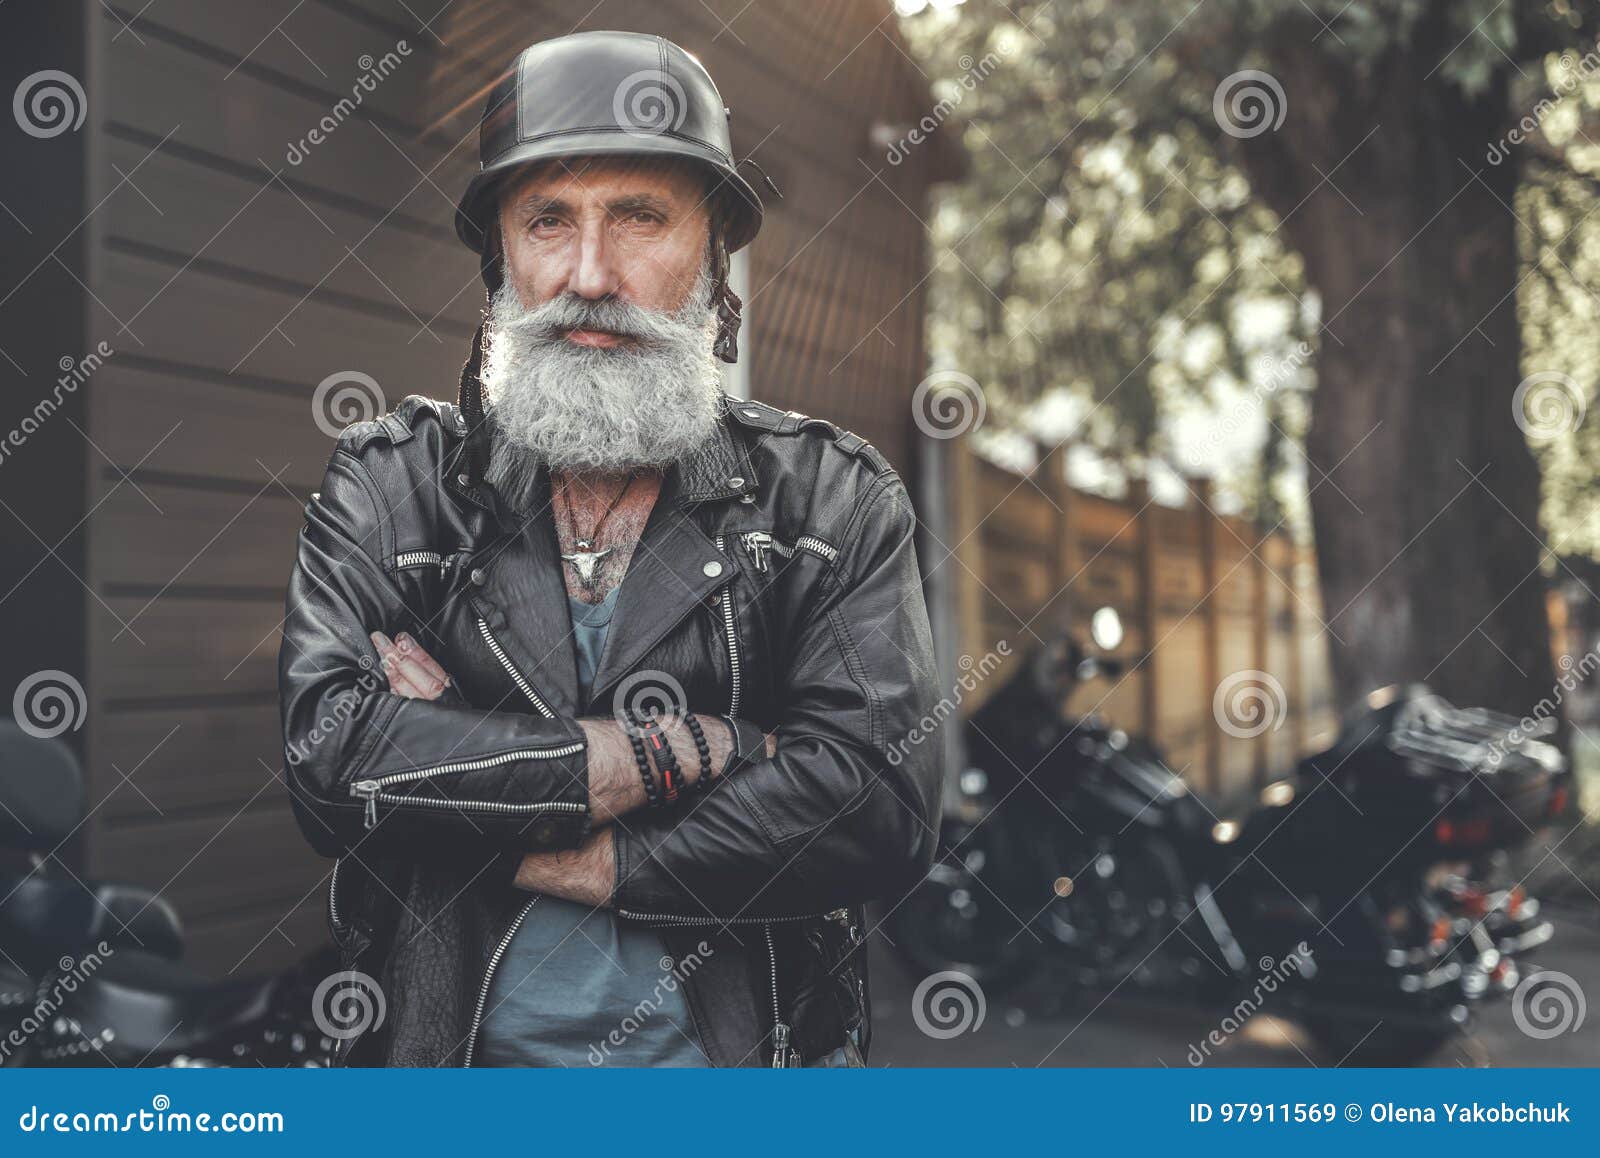 Cheerful Smiling Old Man in Helmet Stock Image - Image of gloves, hold ...